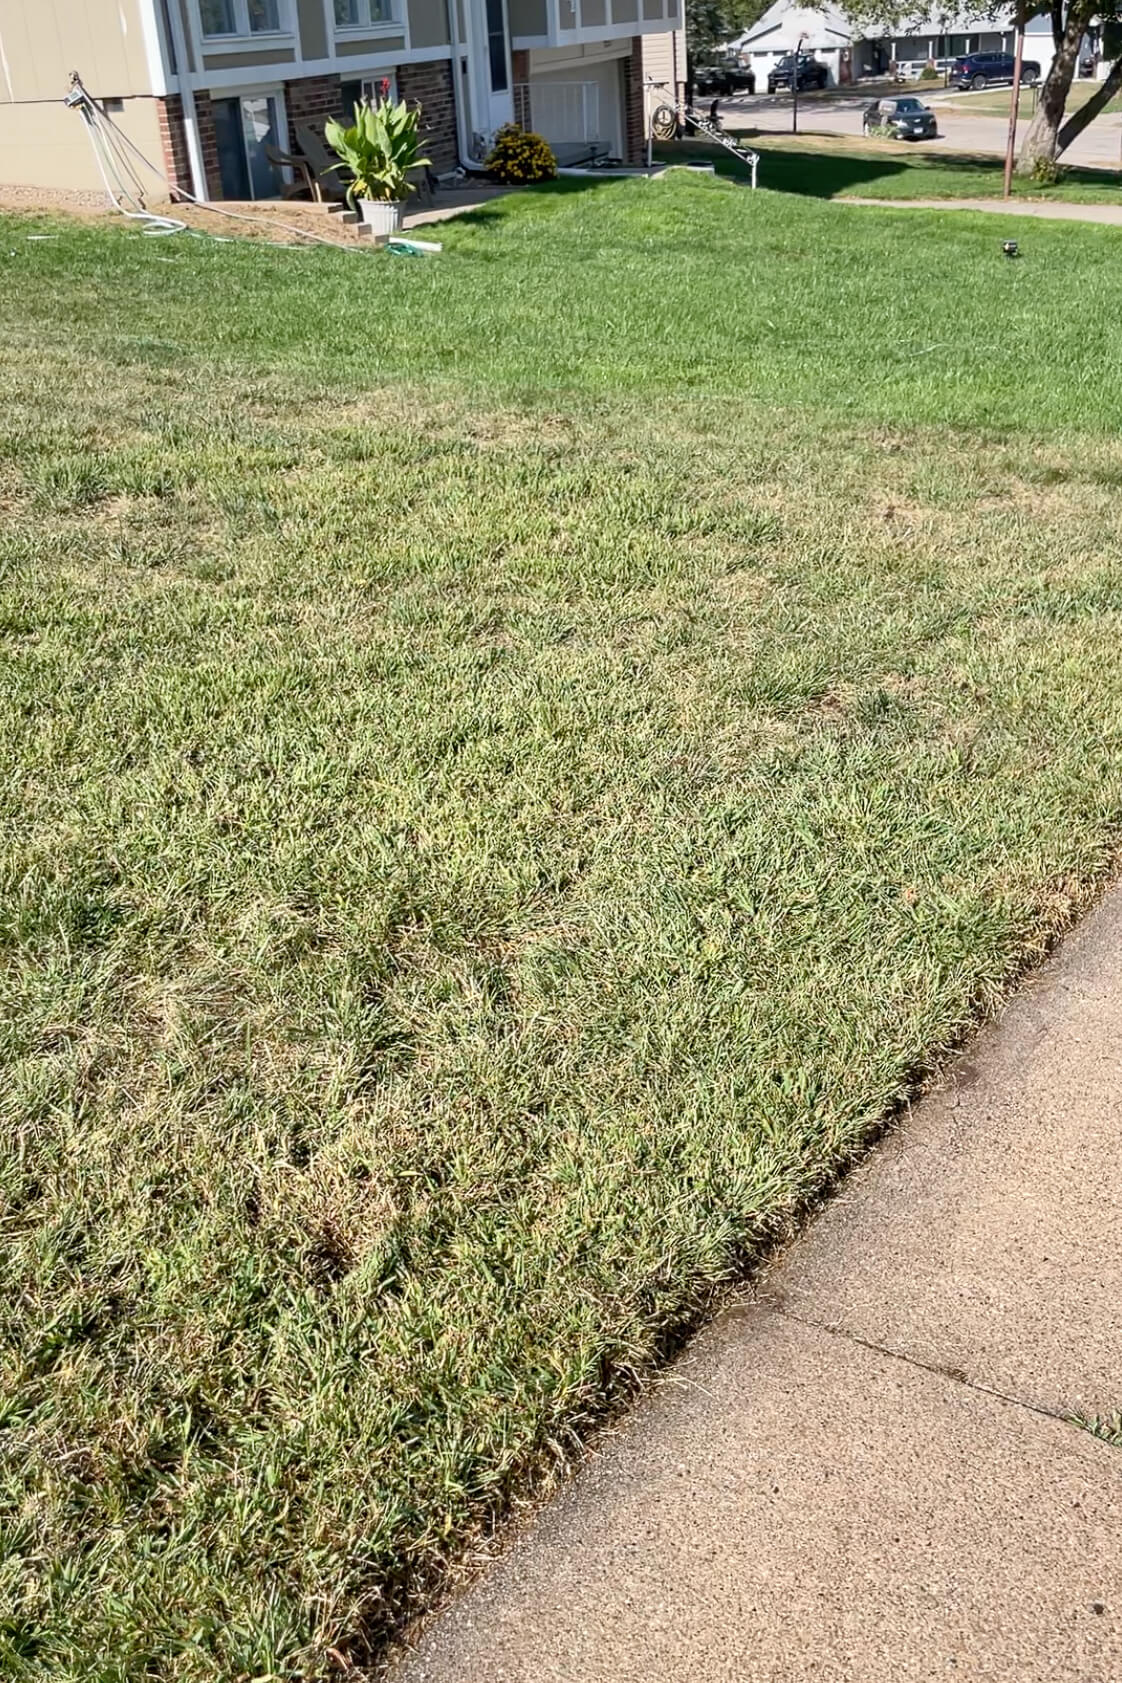 A brown, dry lawn next to a green, well watered lawn.